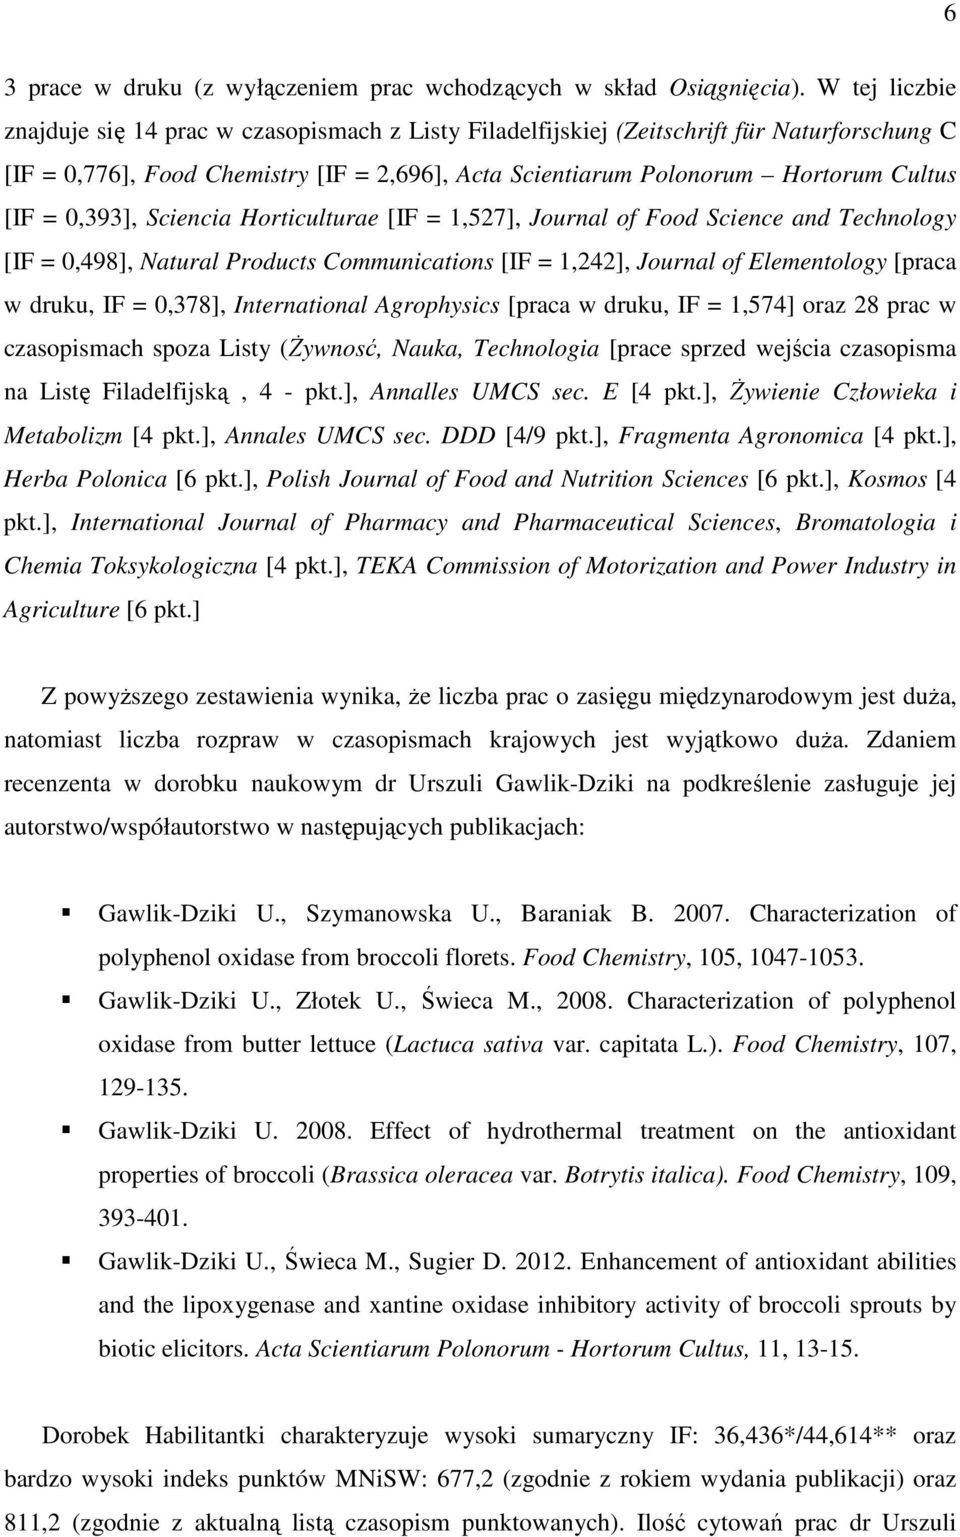 0,393], Sciencia Horticulturae [IF = 1,527], Journal of Food Science and Technology [IF = 0,498], Natural Products Communications [IF = 1,242], Journal of Elementology [praca w druku, IF = 0,378],